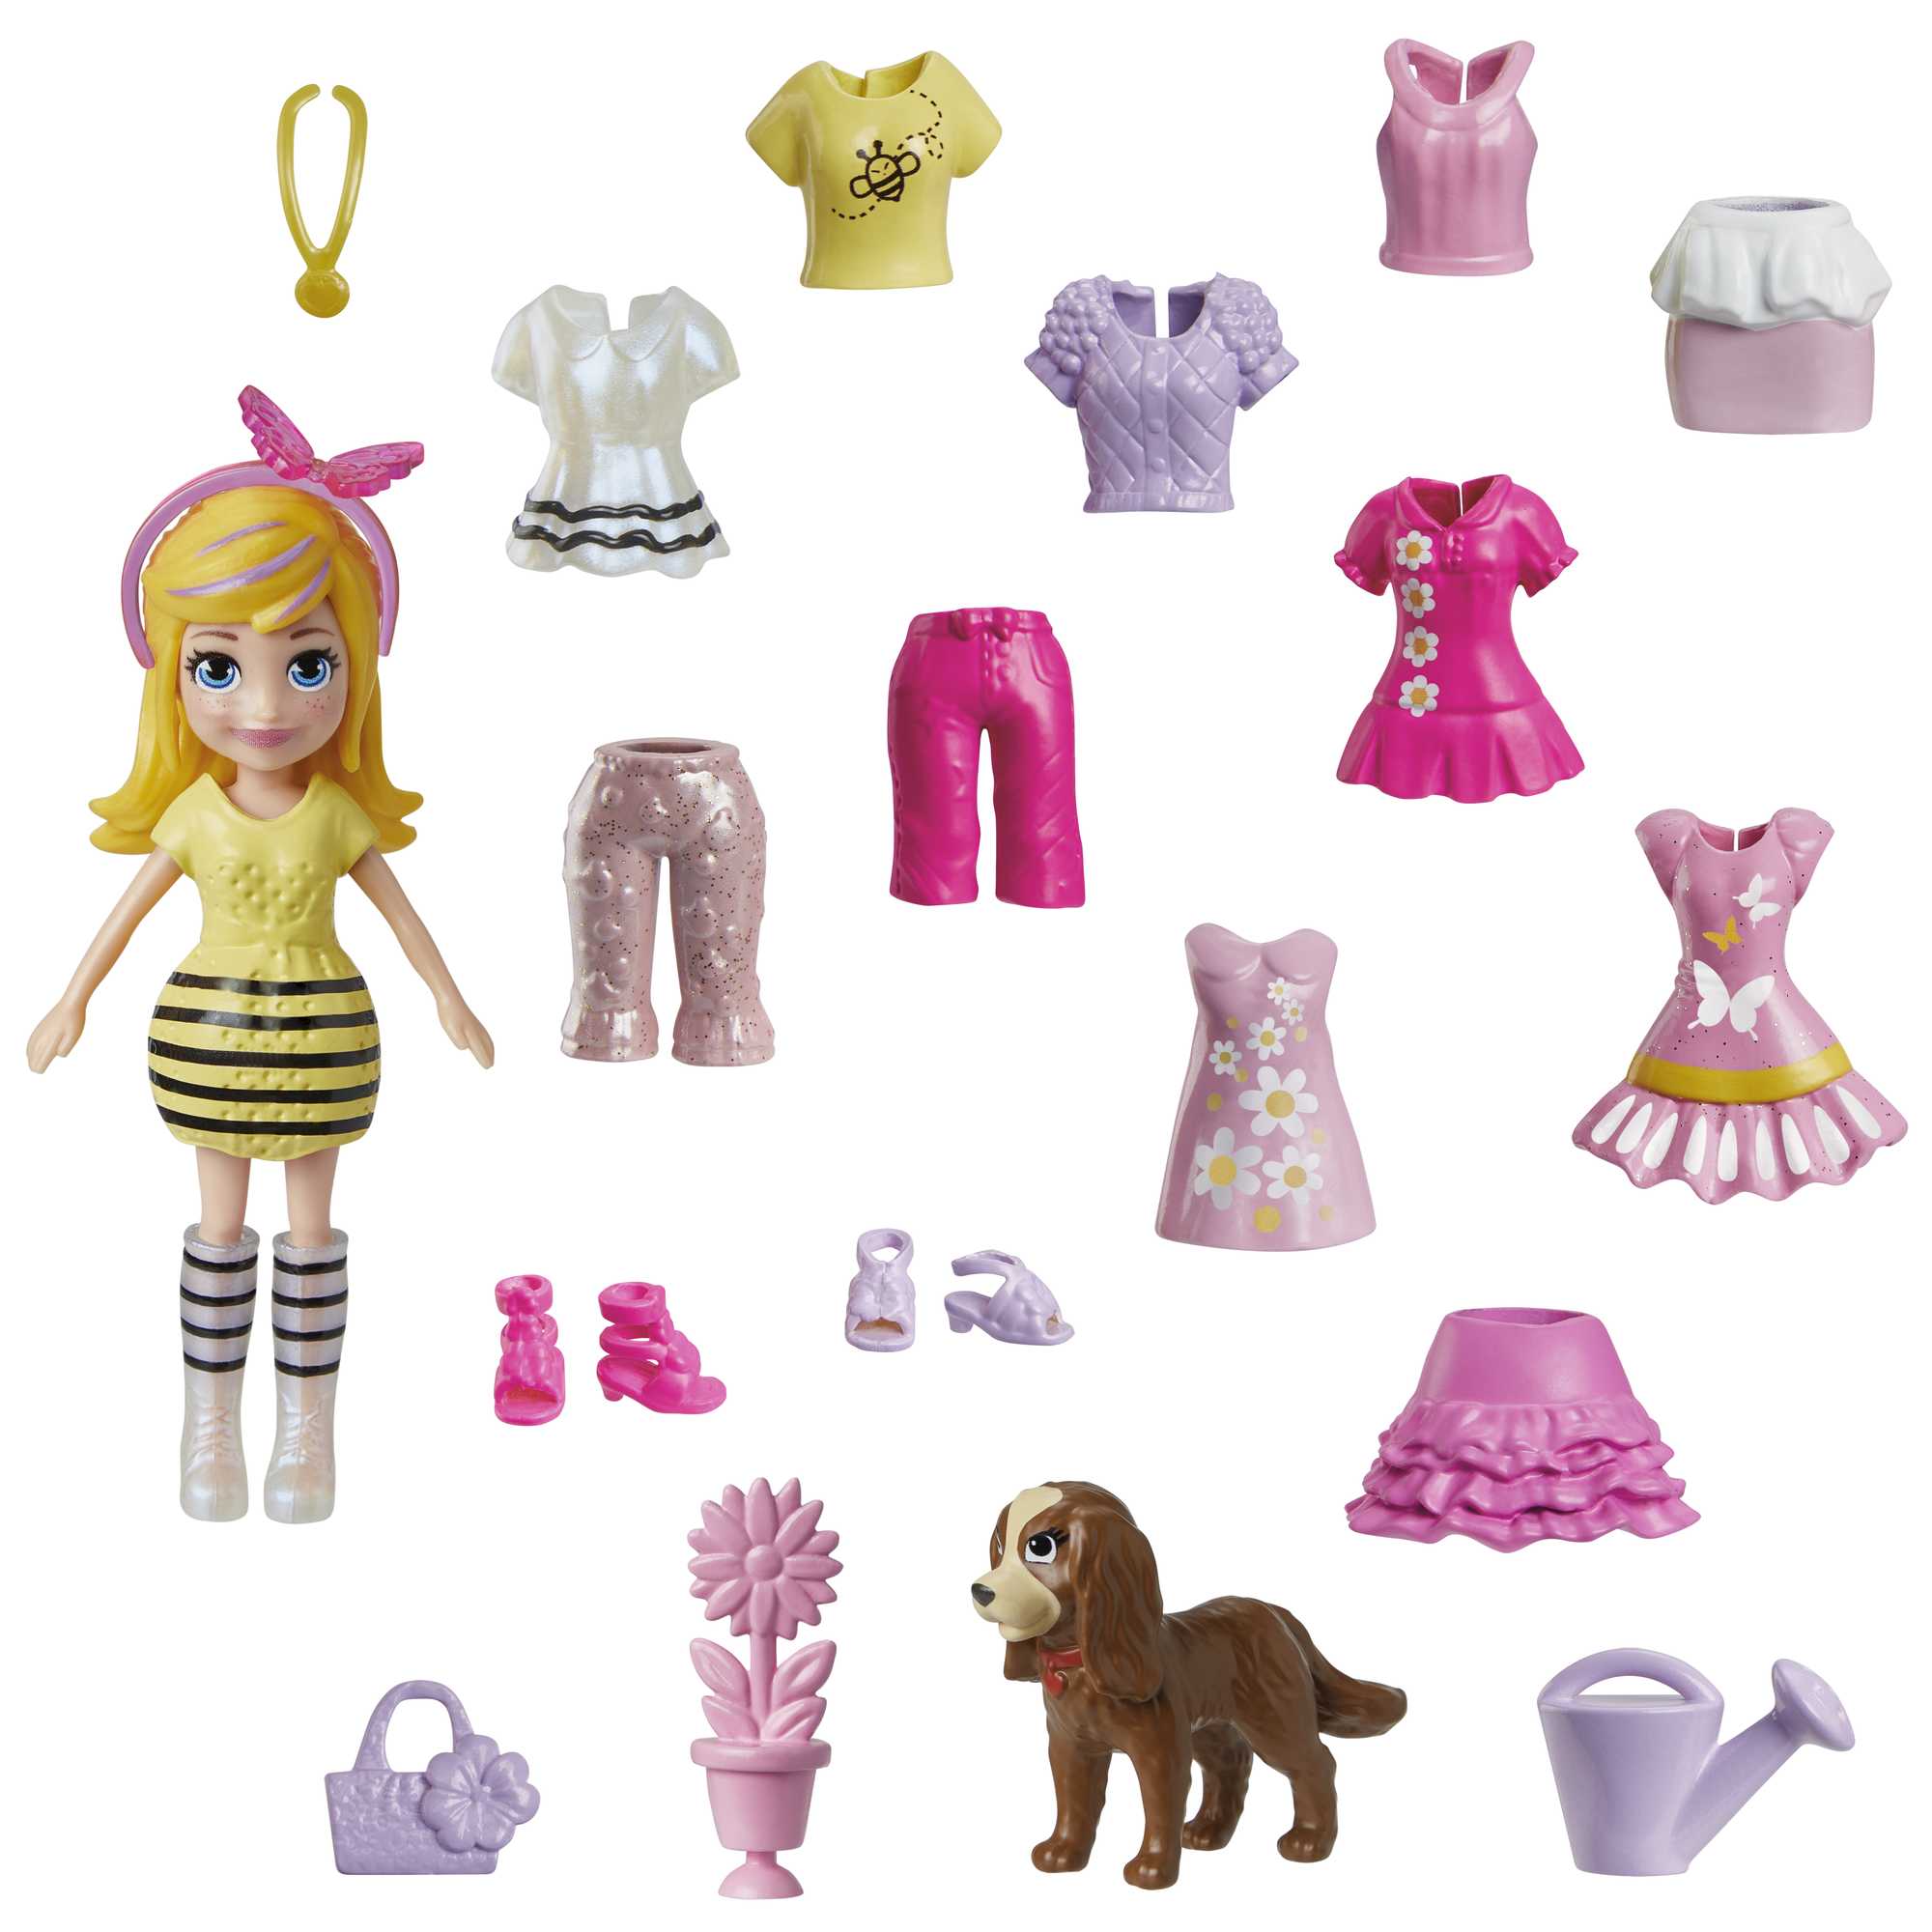 Explore Polly Pocket fashion packs, like this doll with 18 flower-themed  accessories, including a puppy. Find Polly toys, collectibles and gifts at  Shop.Mattel.com.